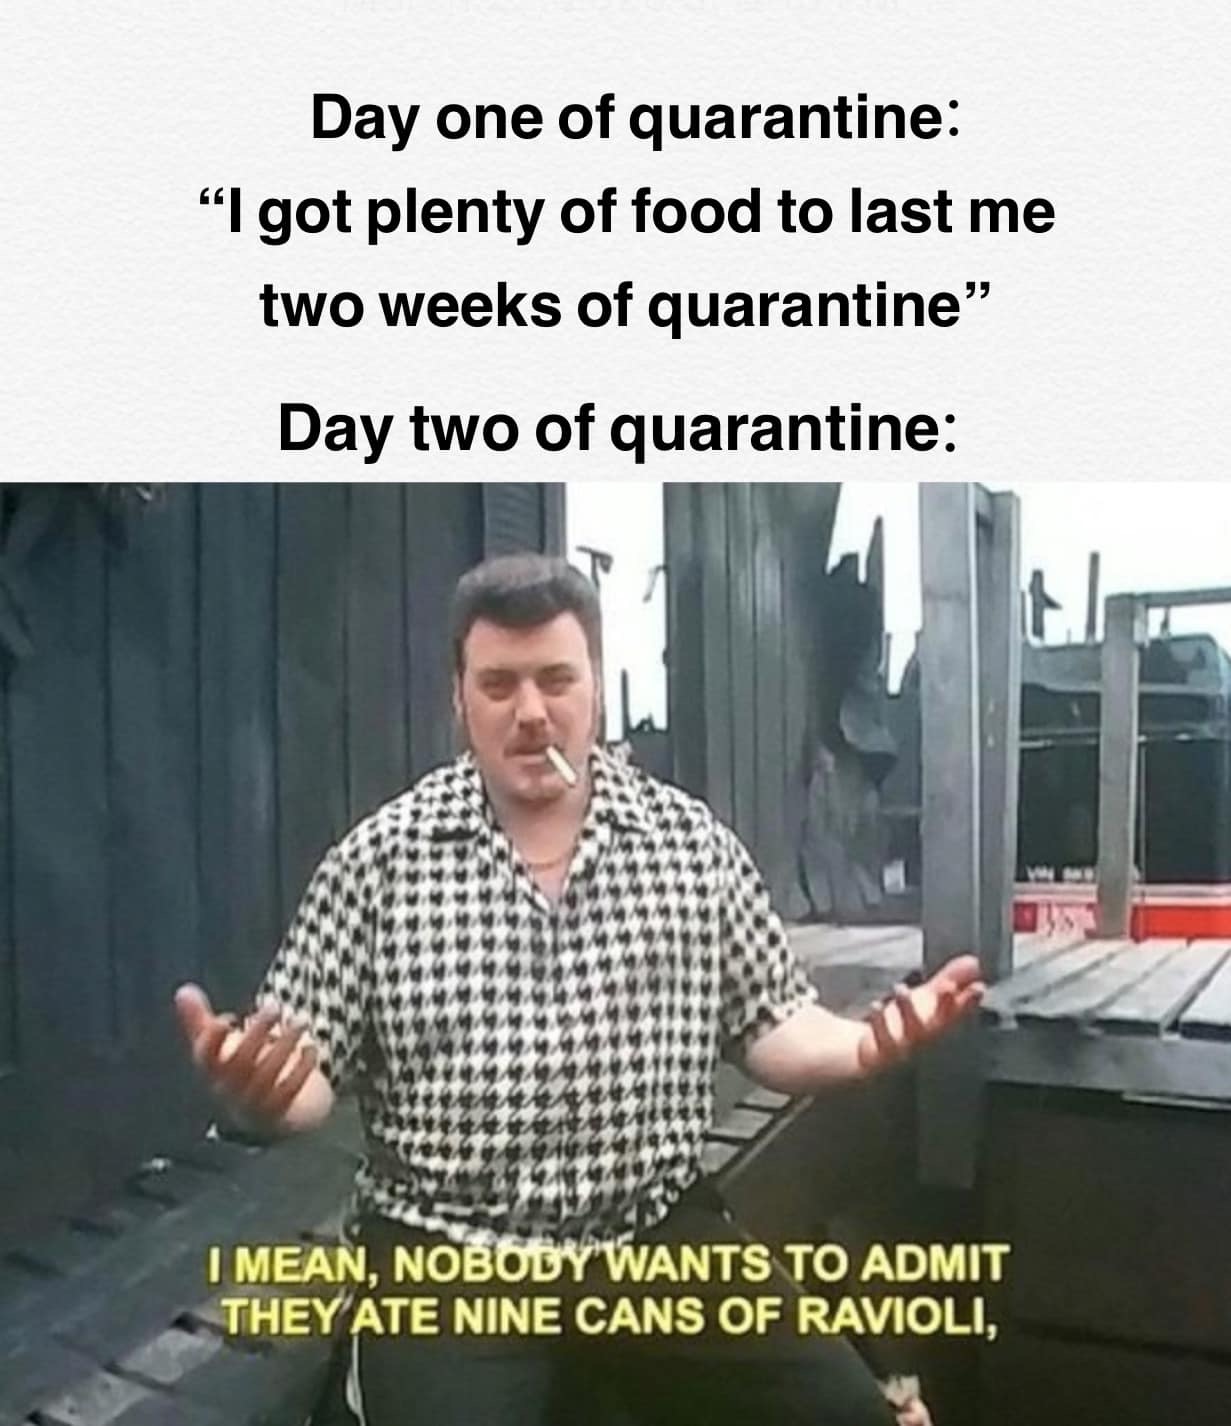 ricky lafleur meme - Day one of quarantine "I got plenty of food to last me two weeks of quarantine Day two of quarantine 19.40 4 re12 I Mean, Nobody Wants To Admit They Ate Nine Cans Of Ravioli,